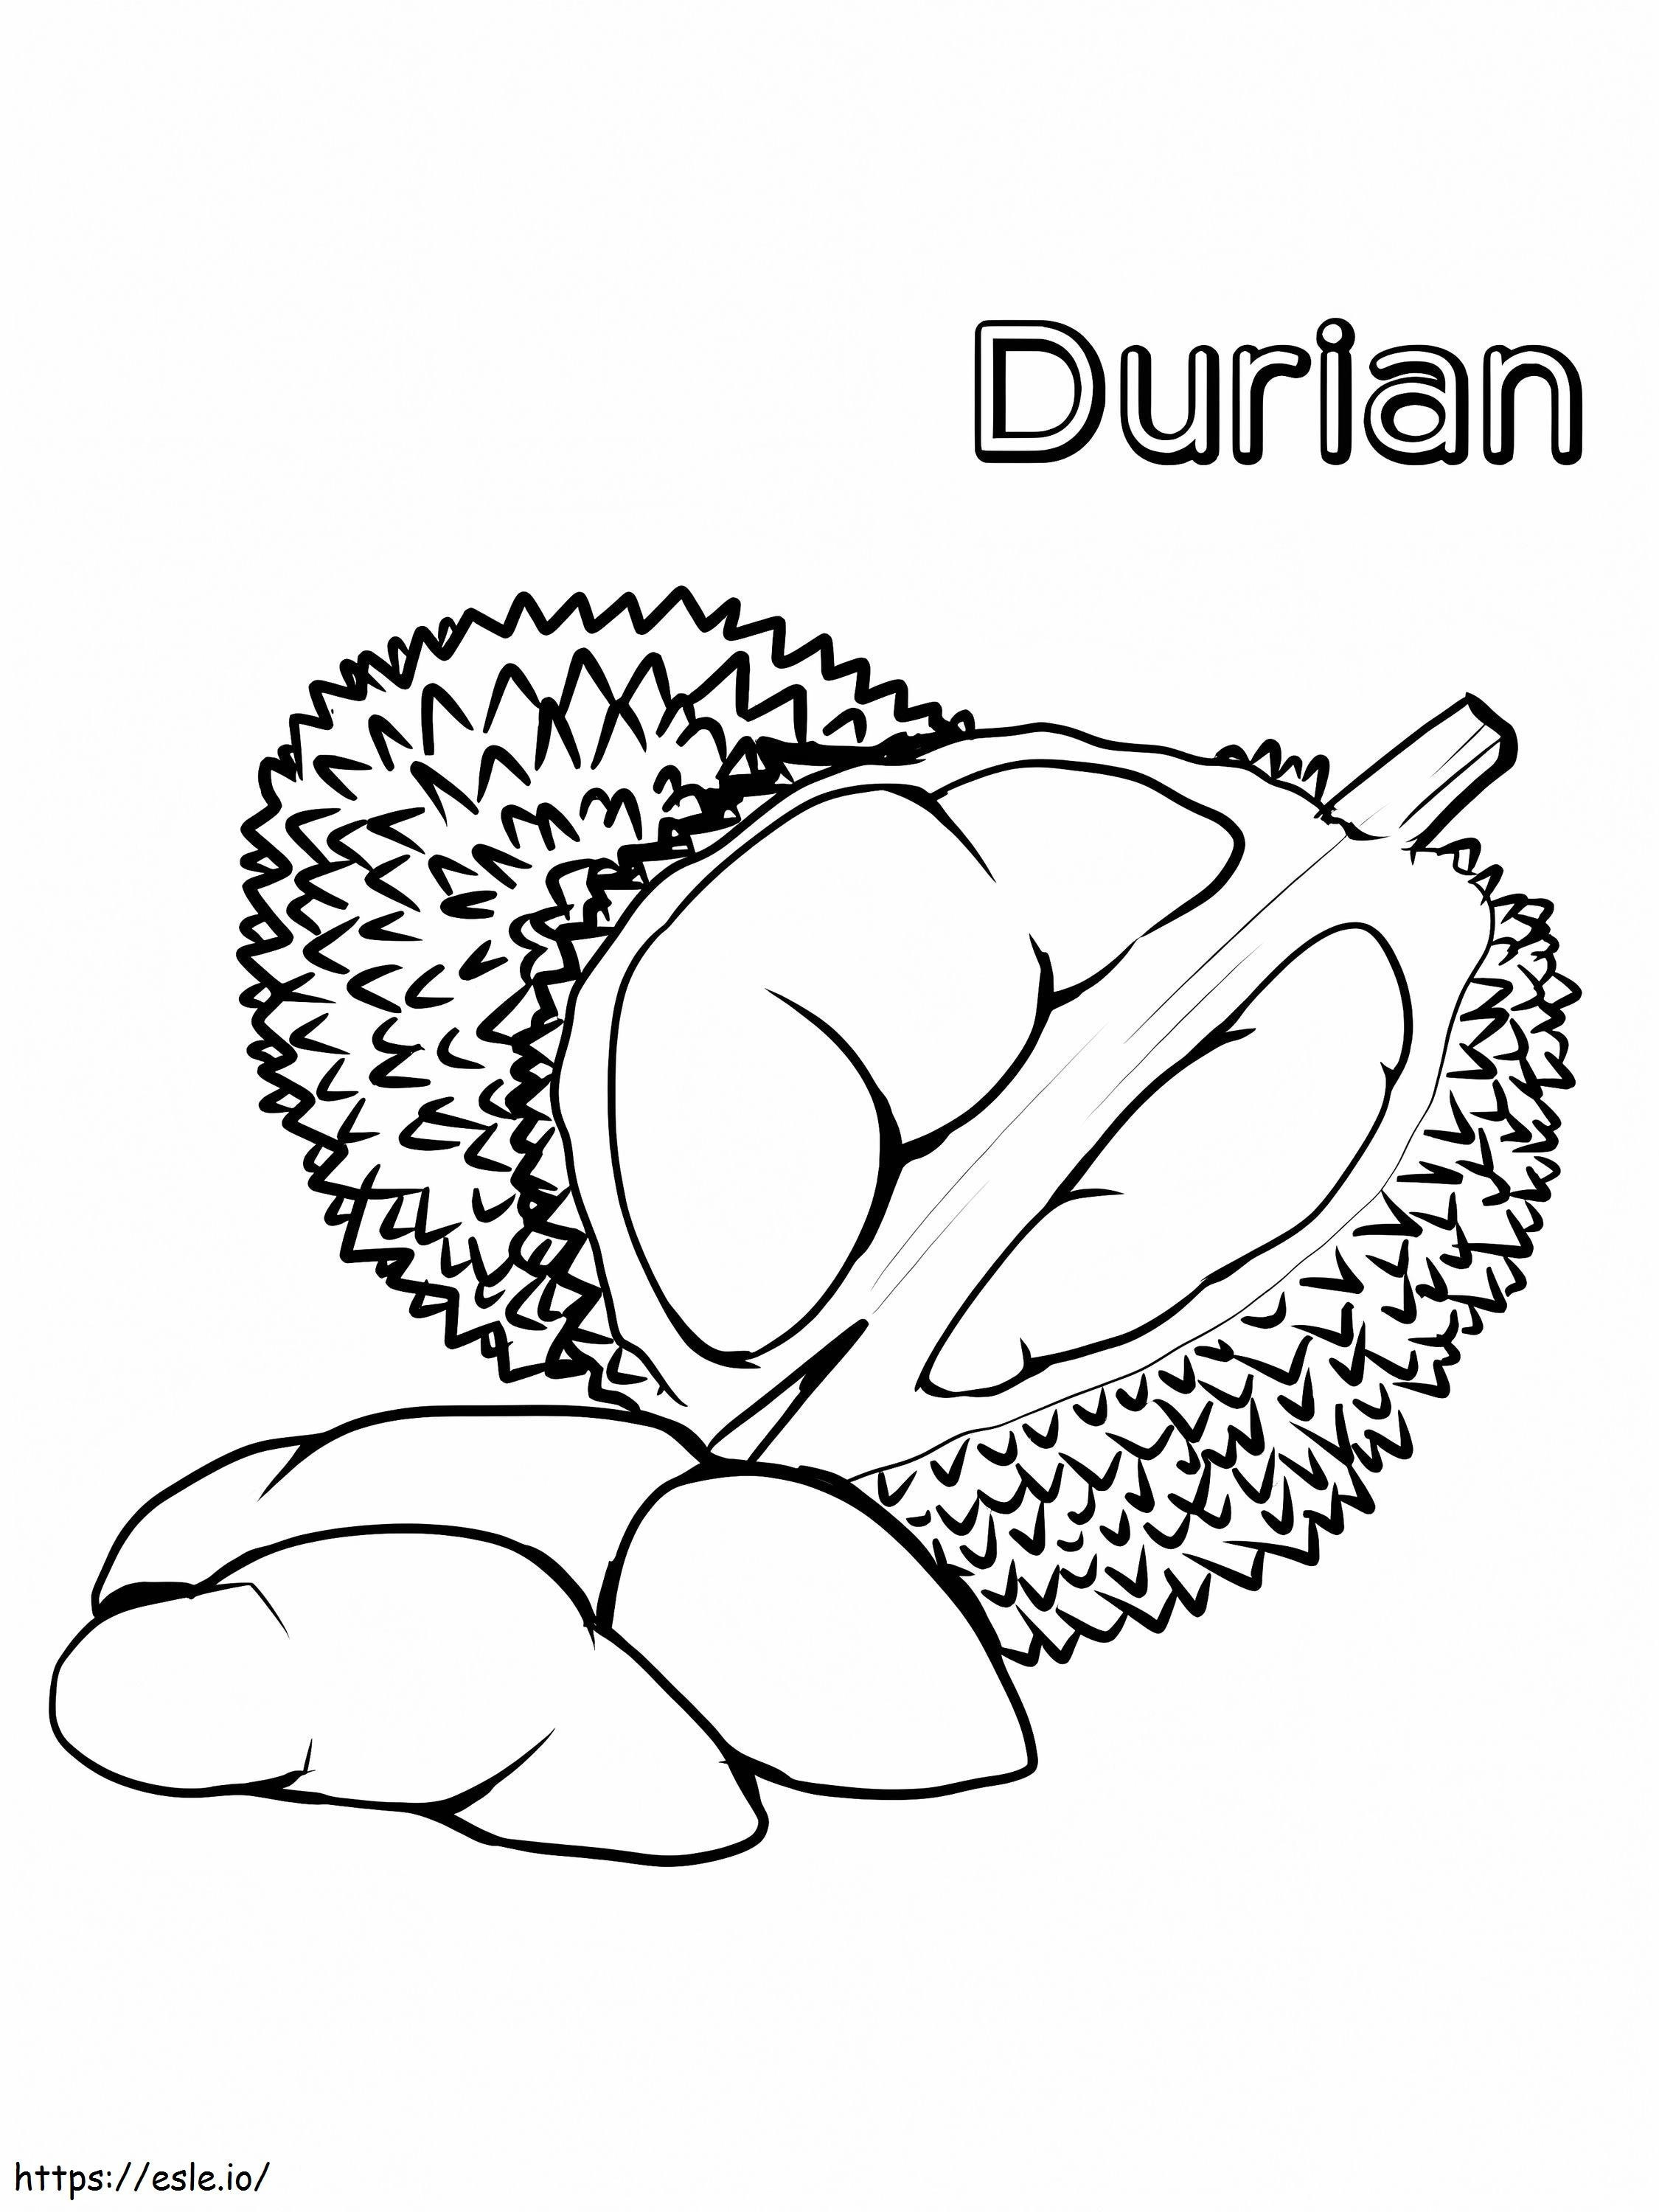 Durian Normal coloring page